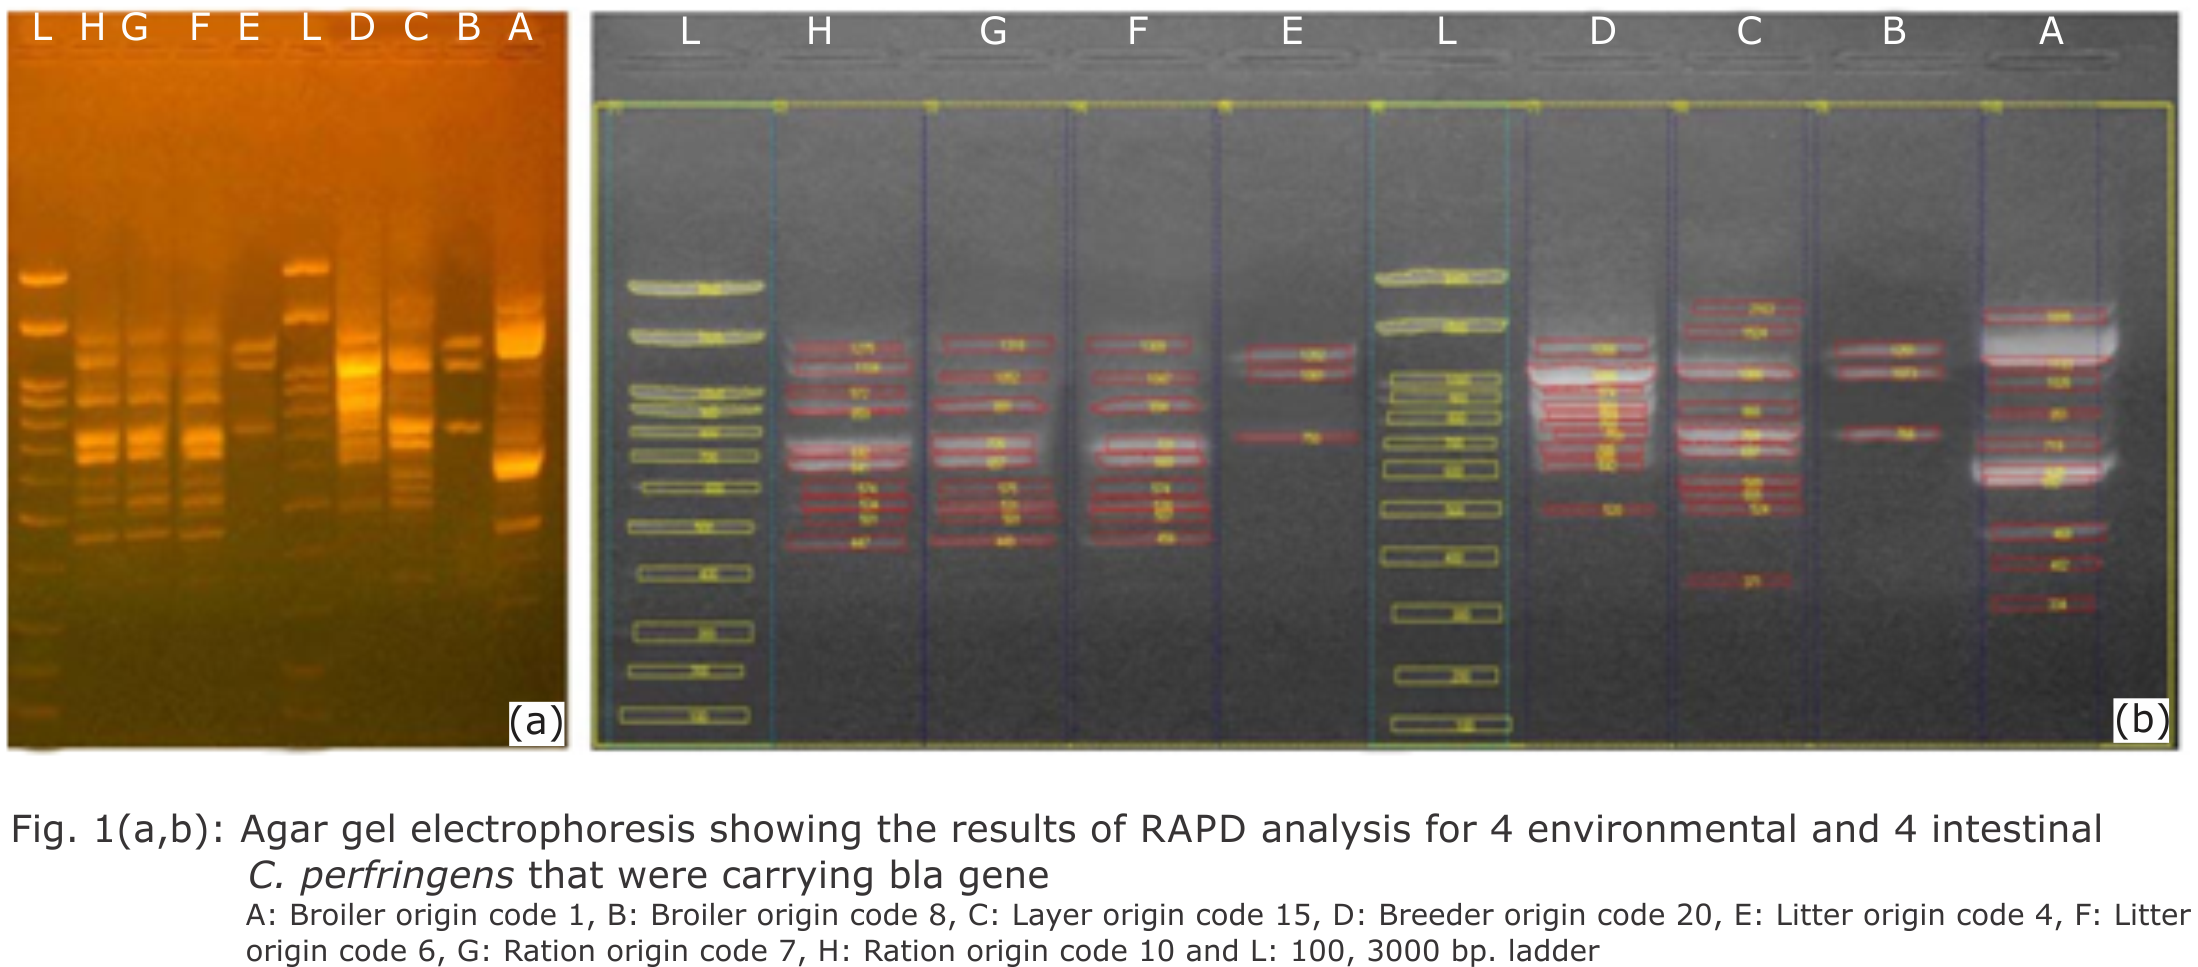 Fig. 1: Agar gel electrophoresis showing the results of RAPD analysis for 4 environmental and 4 intestinal C. perfringens that were carrying bla gene